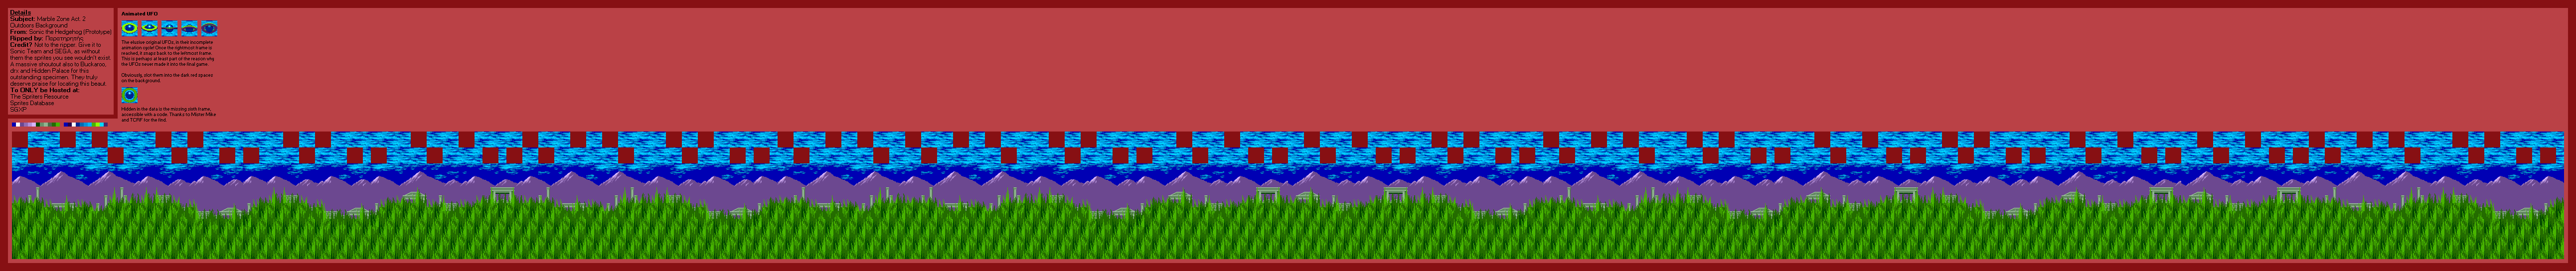 Sonic the Hedgehog (Prototype) - Marble Zone Act. 2 (Outdoors)